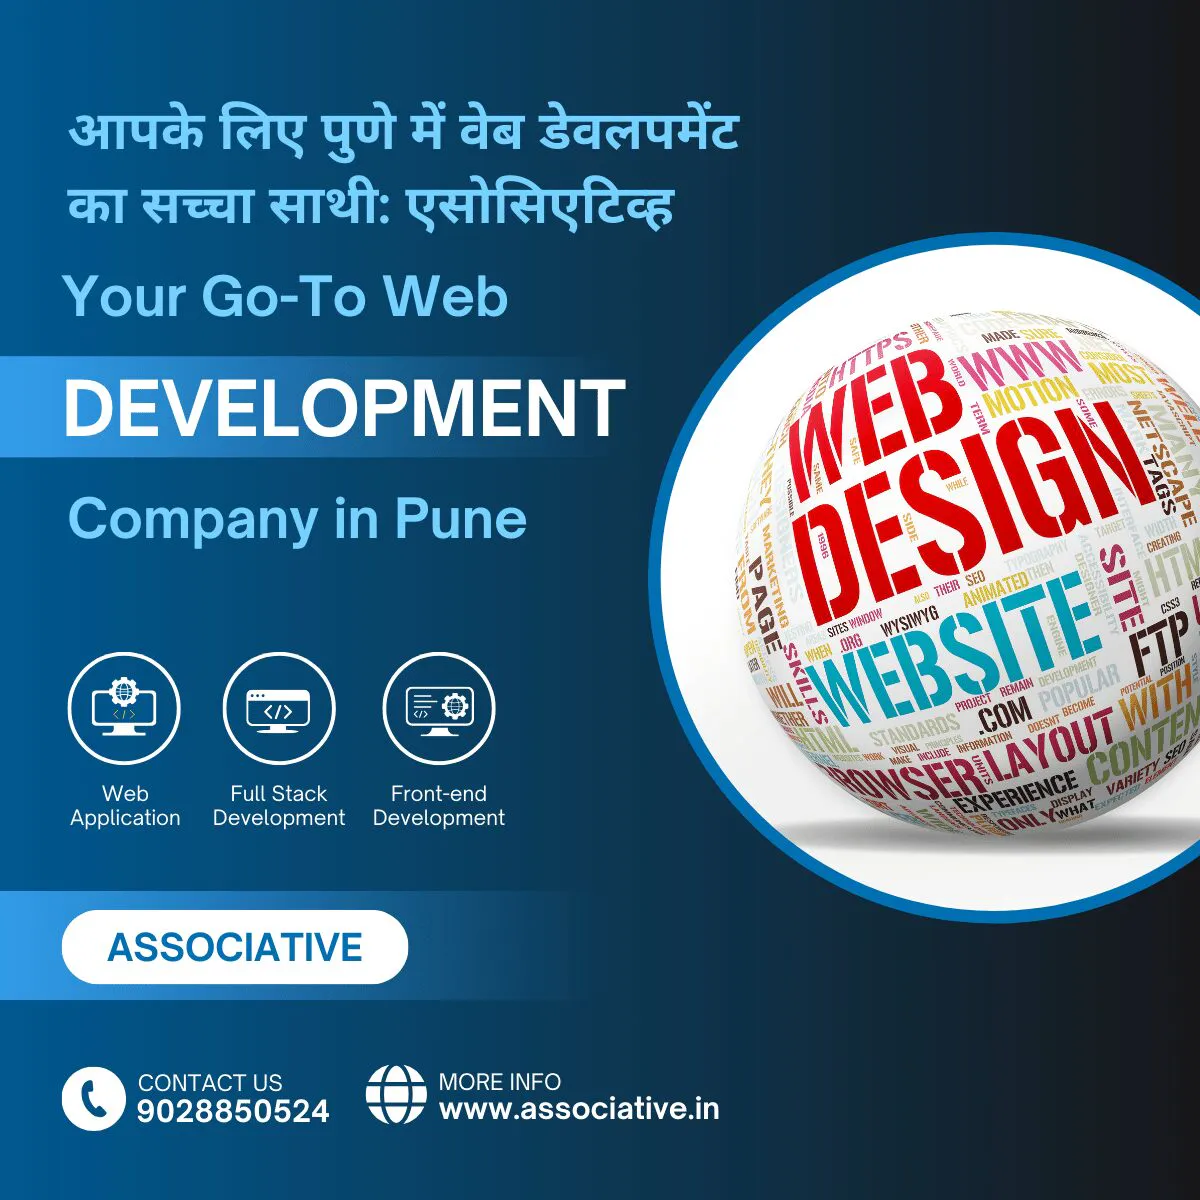 Your Go-To Web Development Company in Pune